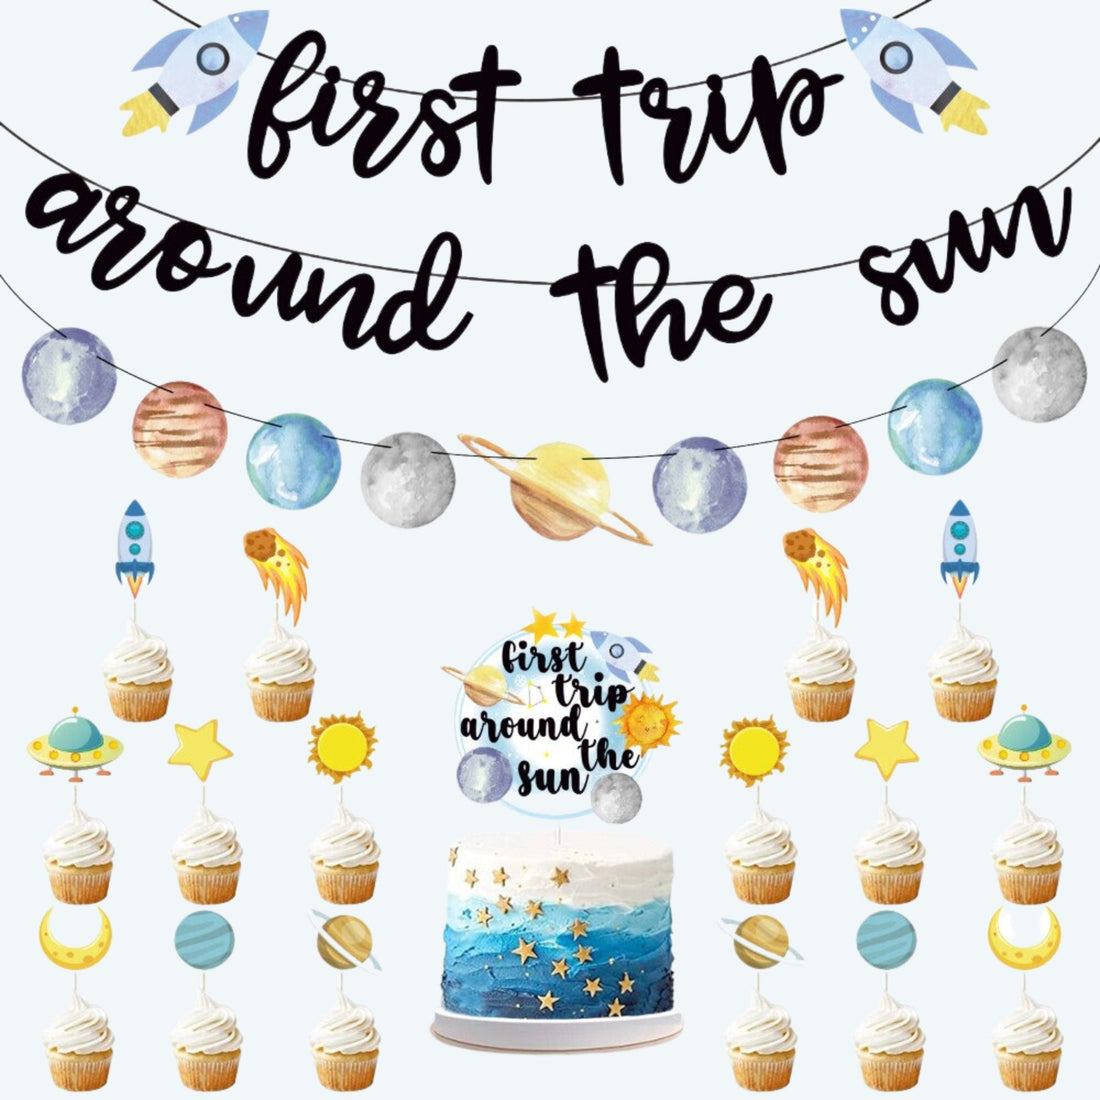 First Trip Around the Sun Space Birthday Party Decorations - Blast Off with Astronauts, Rockets, and Planet Cake Toppers and Decorproduct_type